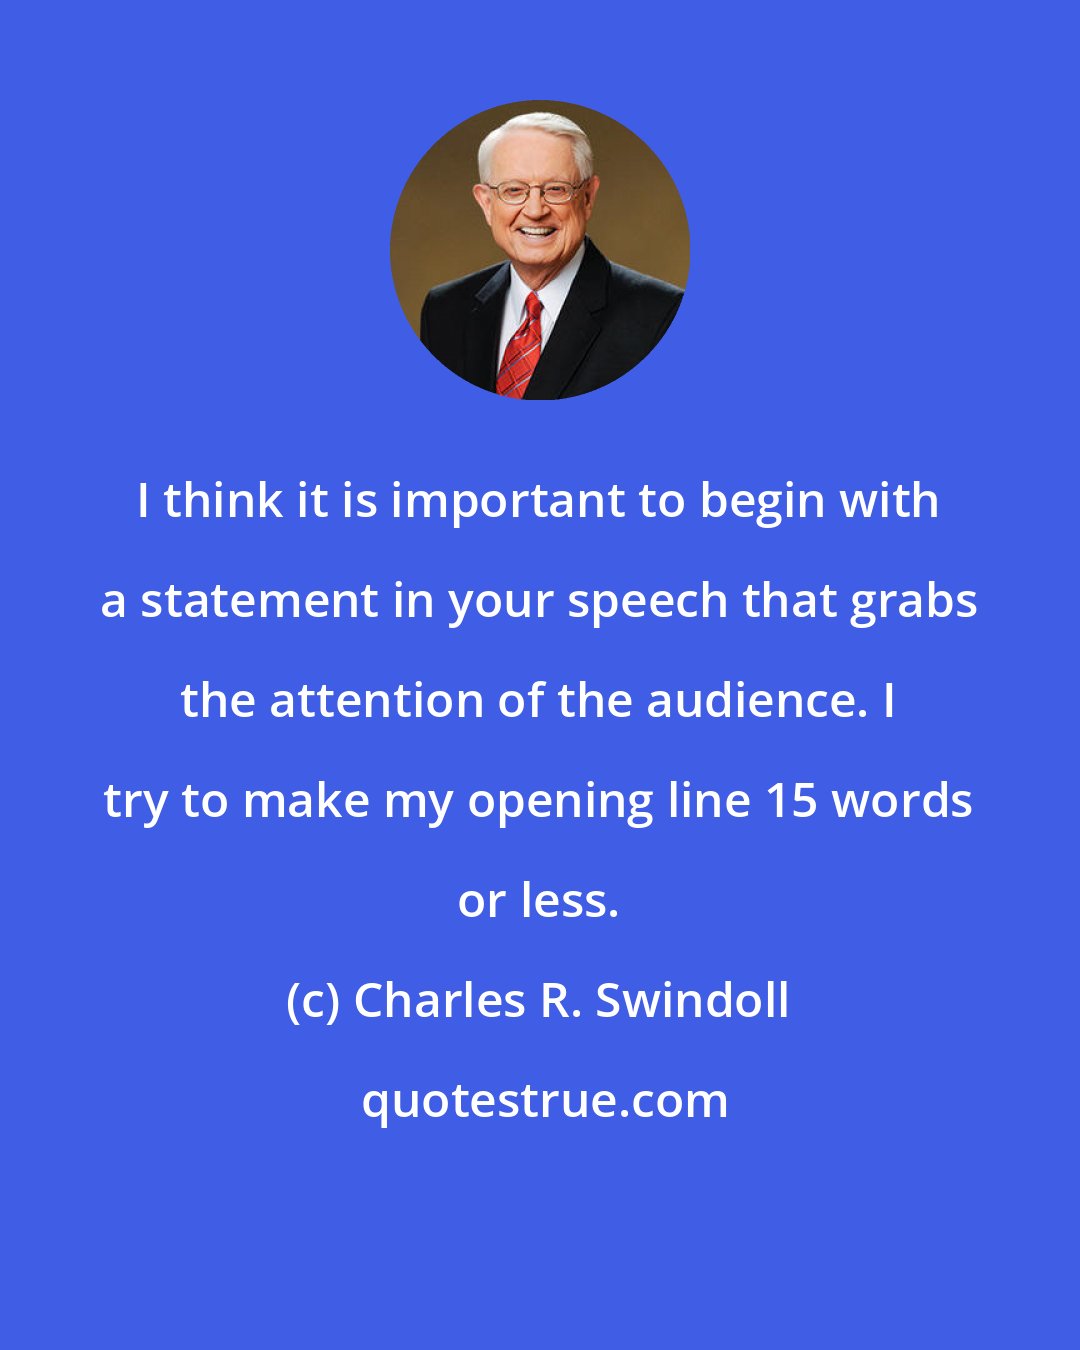 Charles R. Swindoll: I think it is important to begin with a statement in your speech that grabs the attention of the audience. I try to make my opening line 15 words or less.